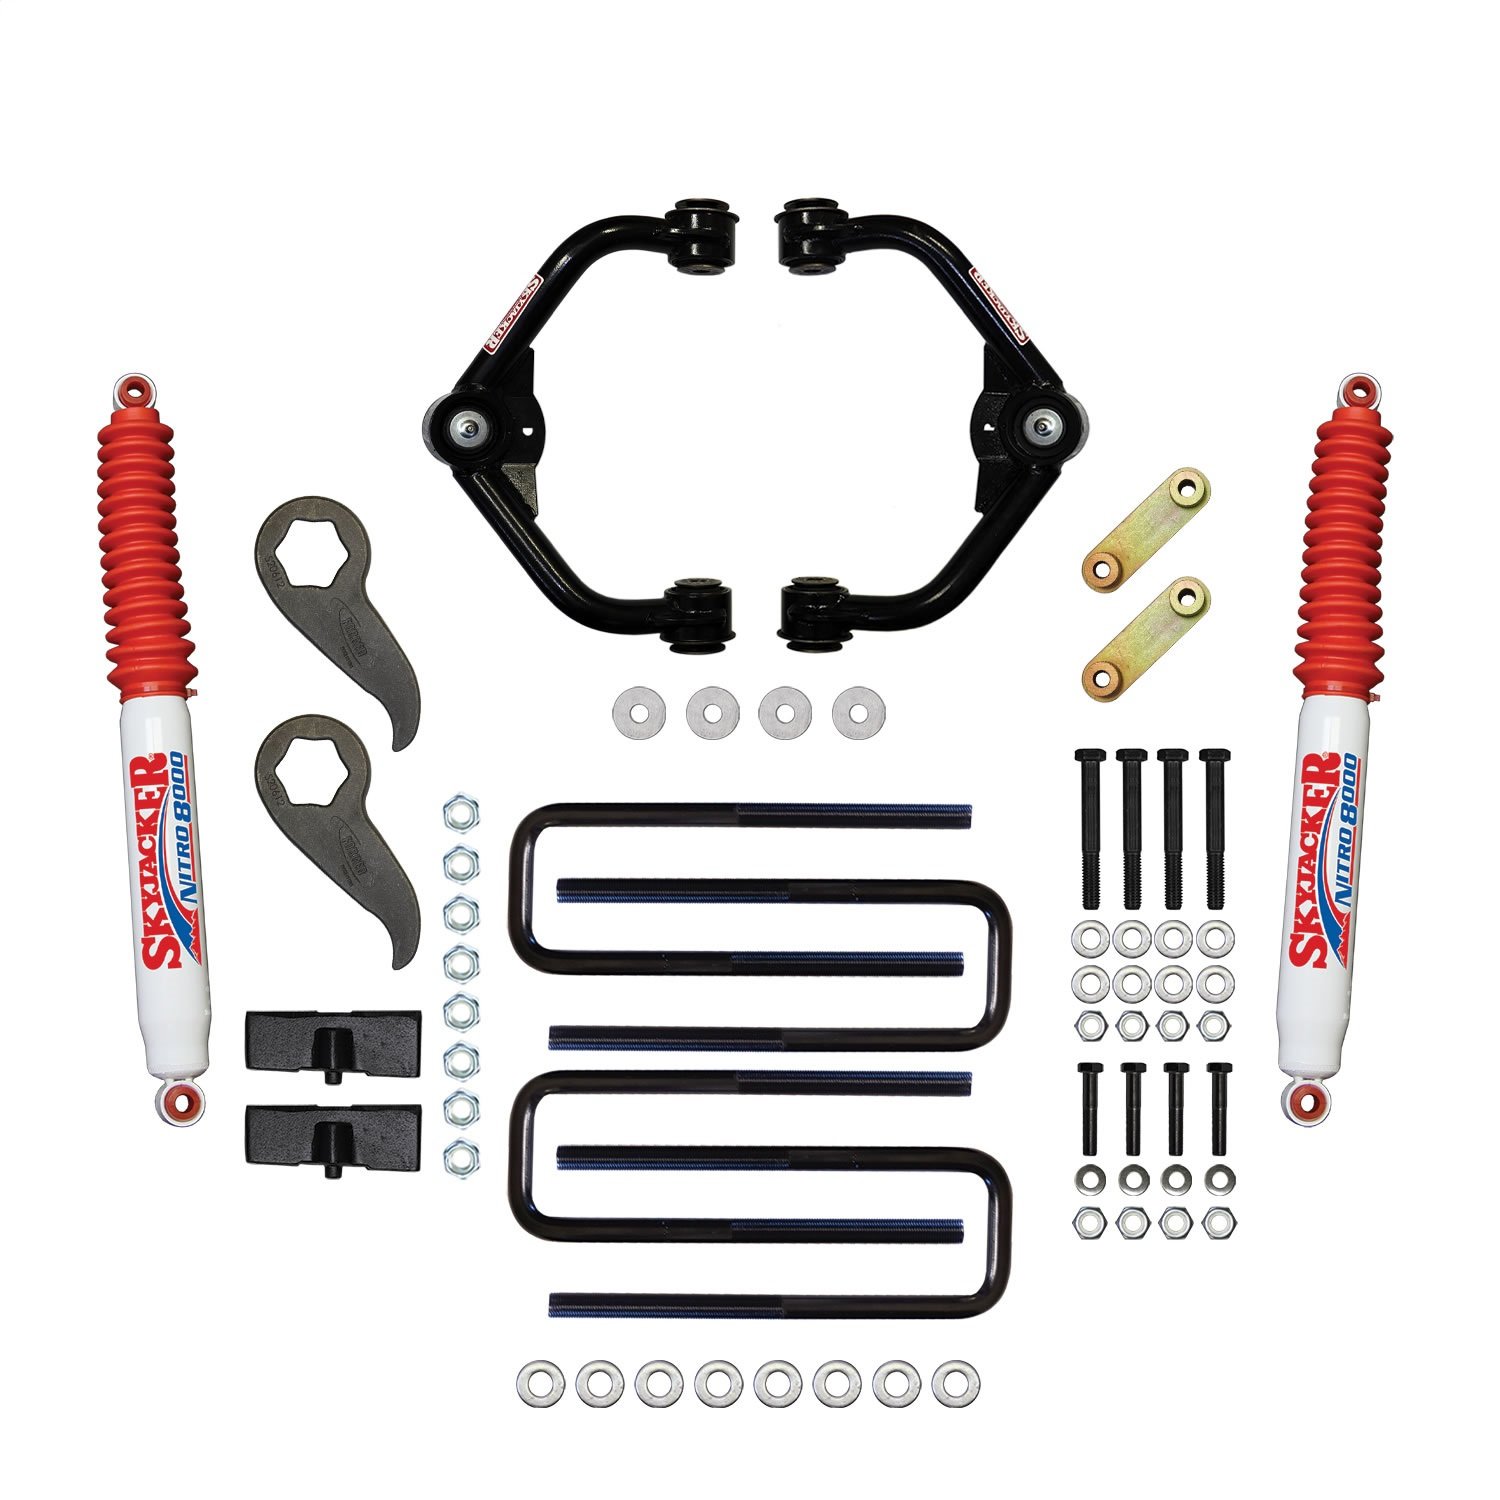 3.0-3.5 in. Suspension Lift Kit for Select GM Trucks with Nitro 8000 Shocks